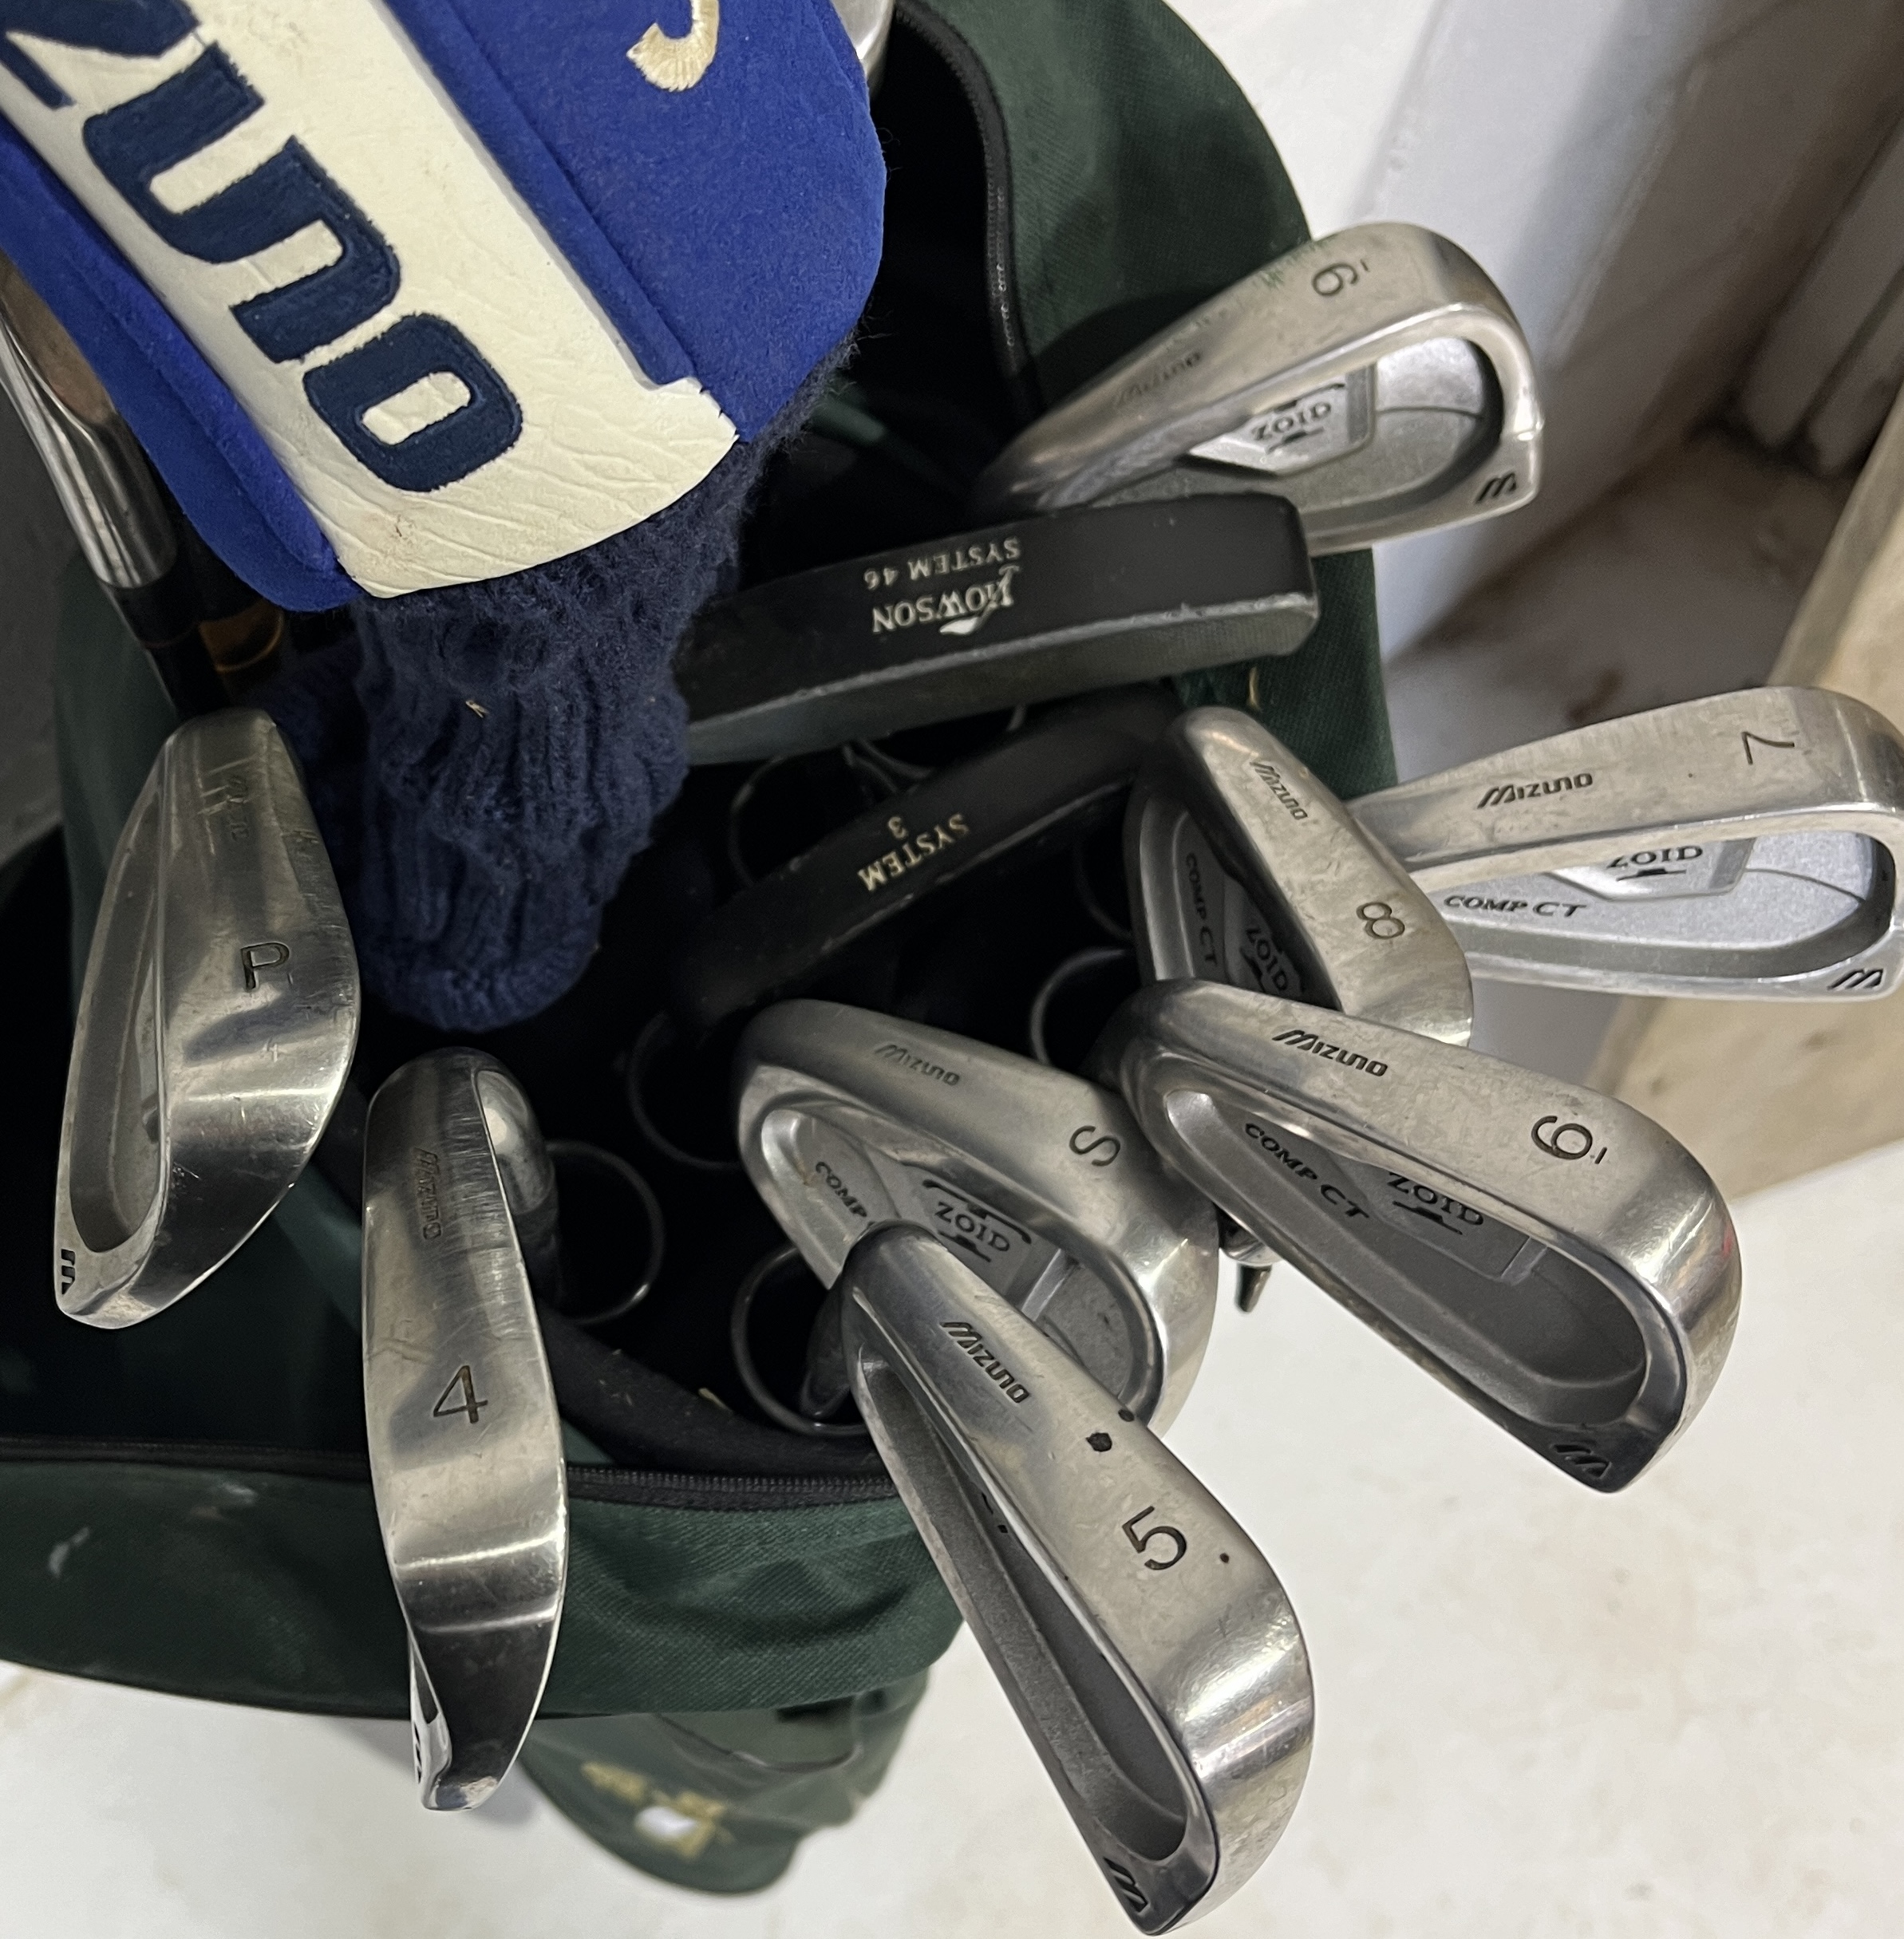 A set of left handed Mizuno Zoid Comp CT golf clubs including a 3 & 5 wood, irons 3-9, pitching - Image 4 of 5